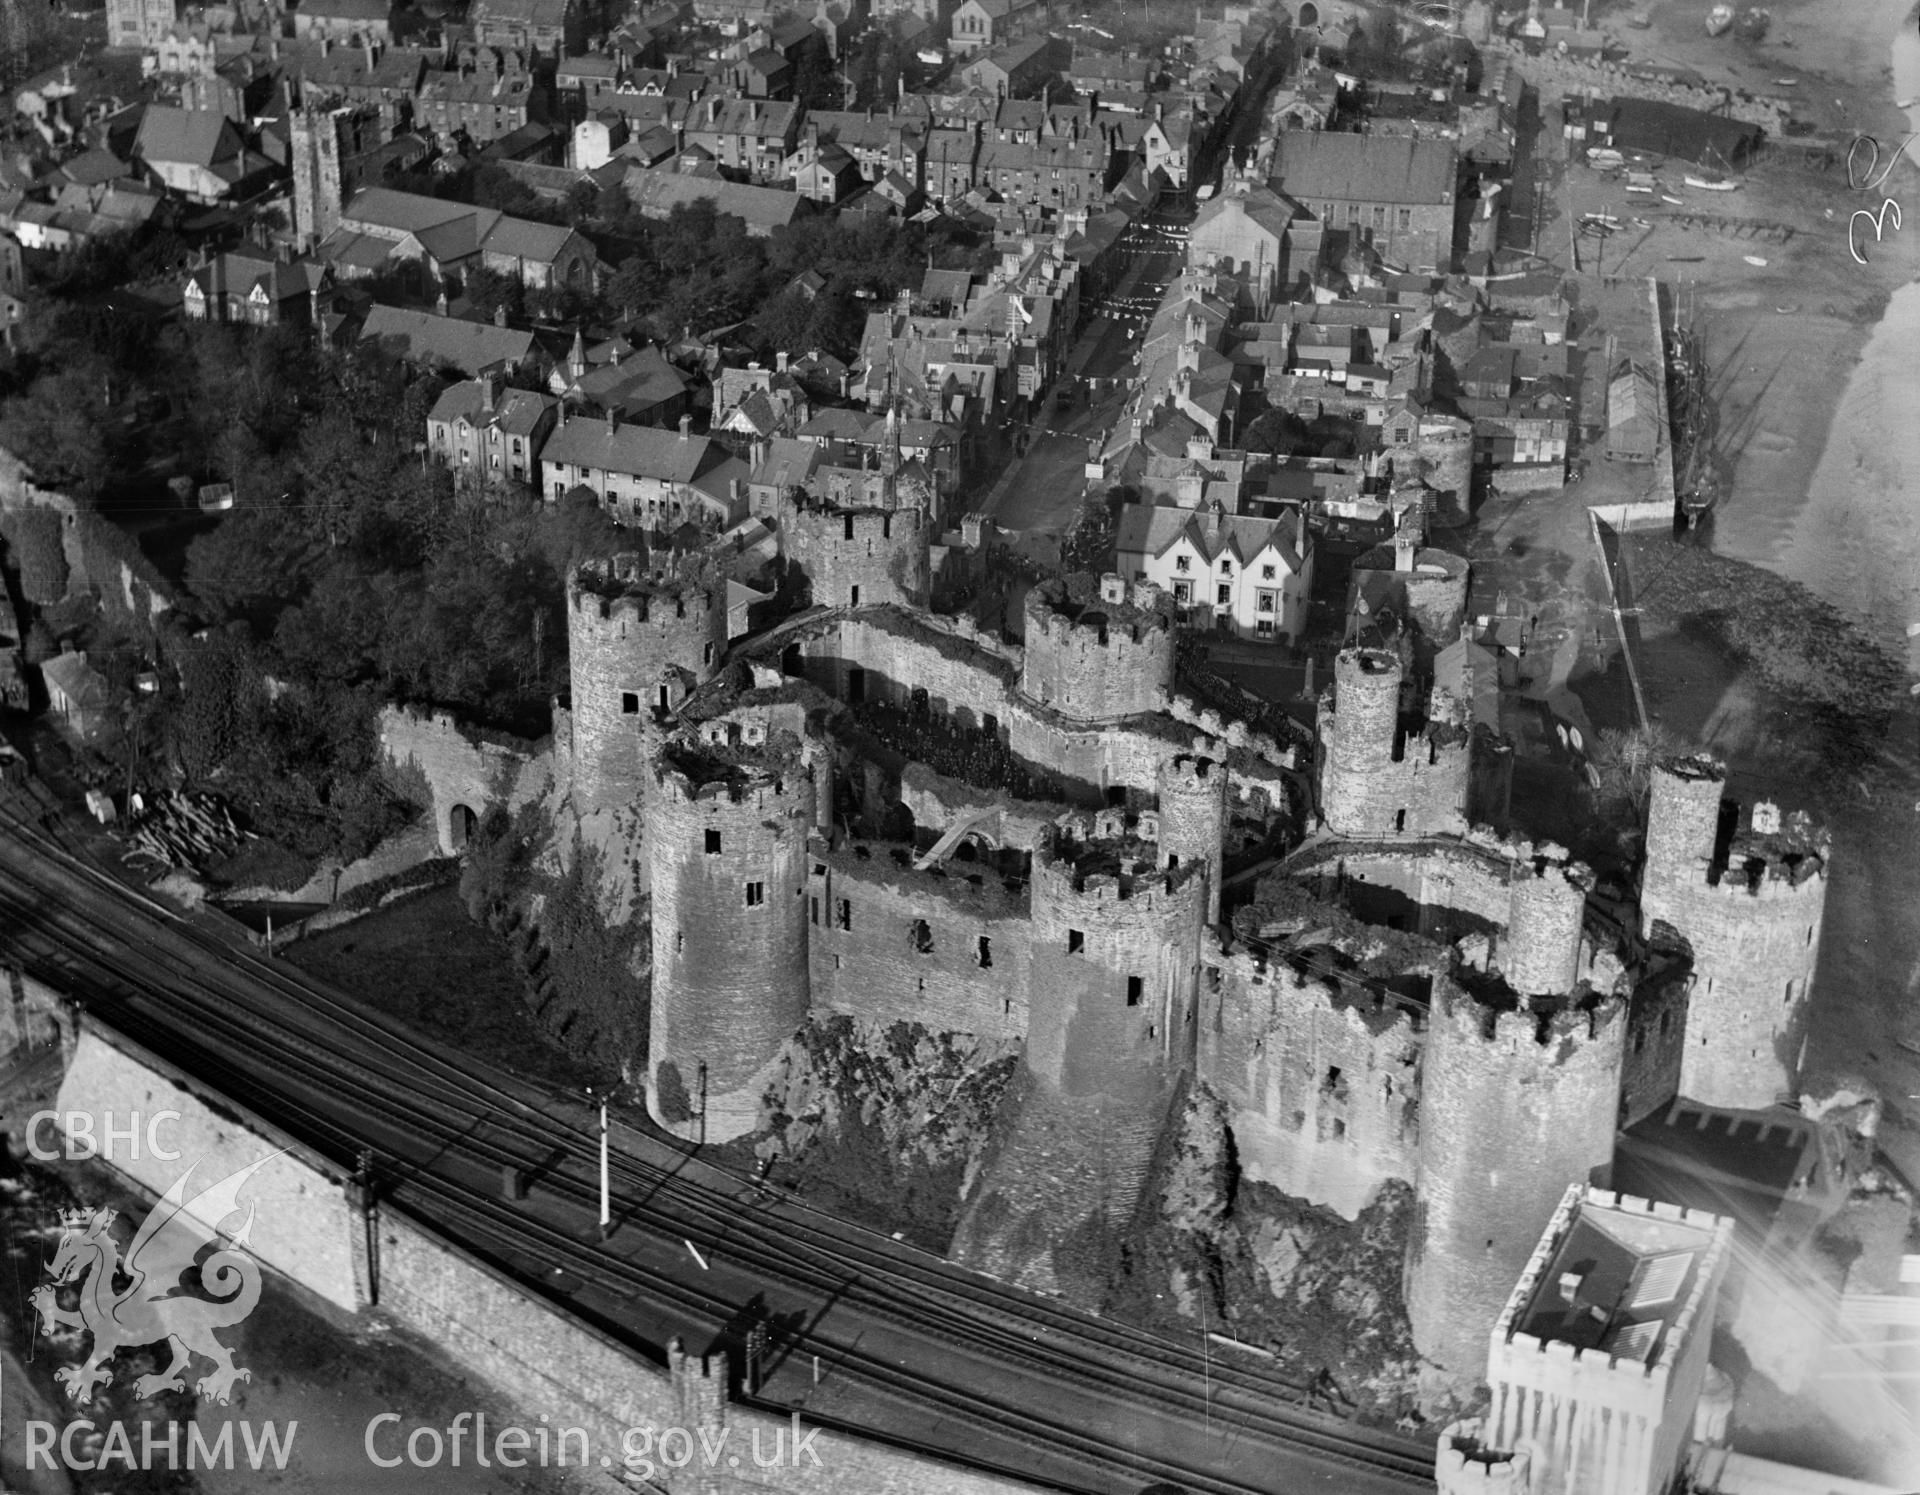 General view of Conwy showing castle during the event of the presentation of a silver box to David Lloyd George by the town of Conwy, 1923, oblique aerial view. 5?x4? black and white glass plate negative.